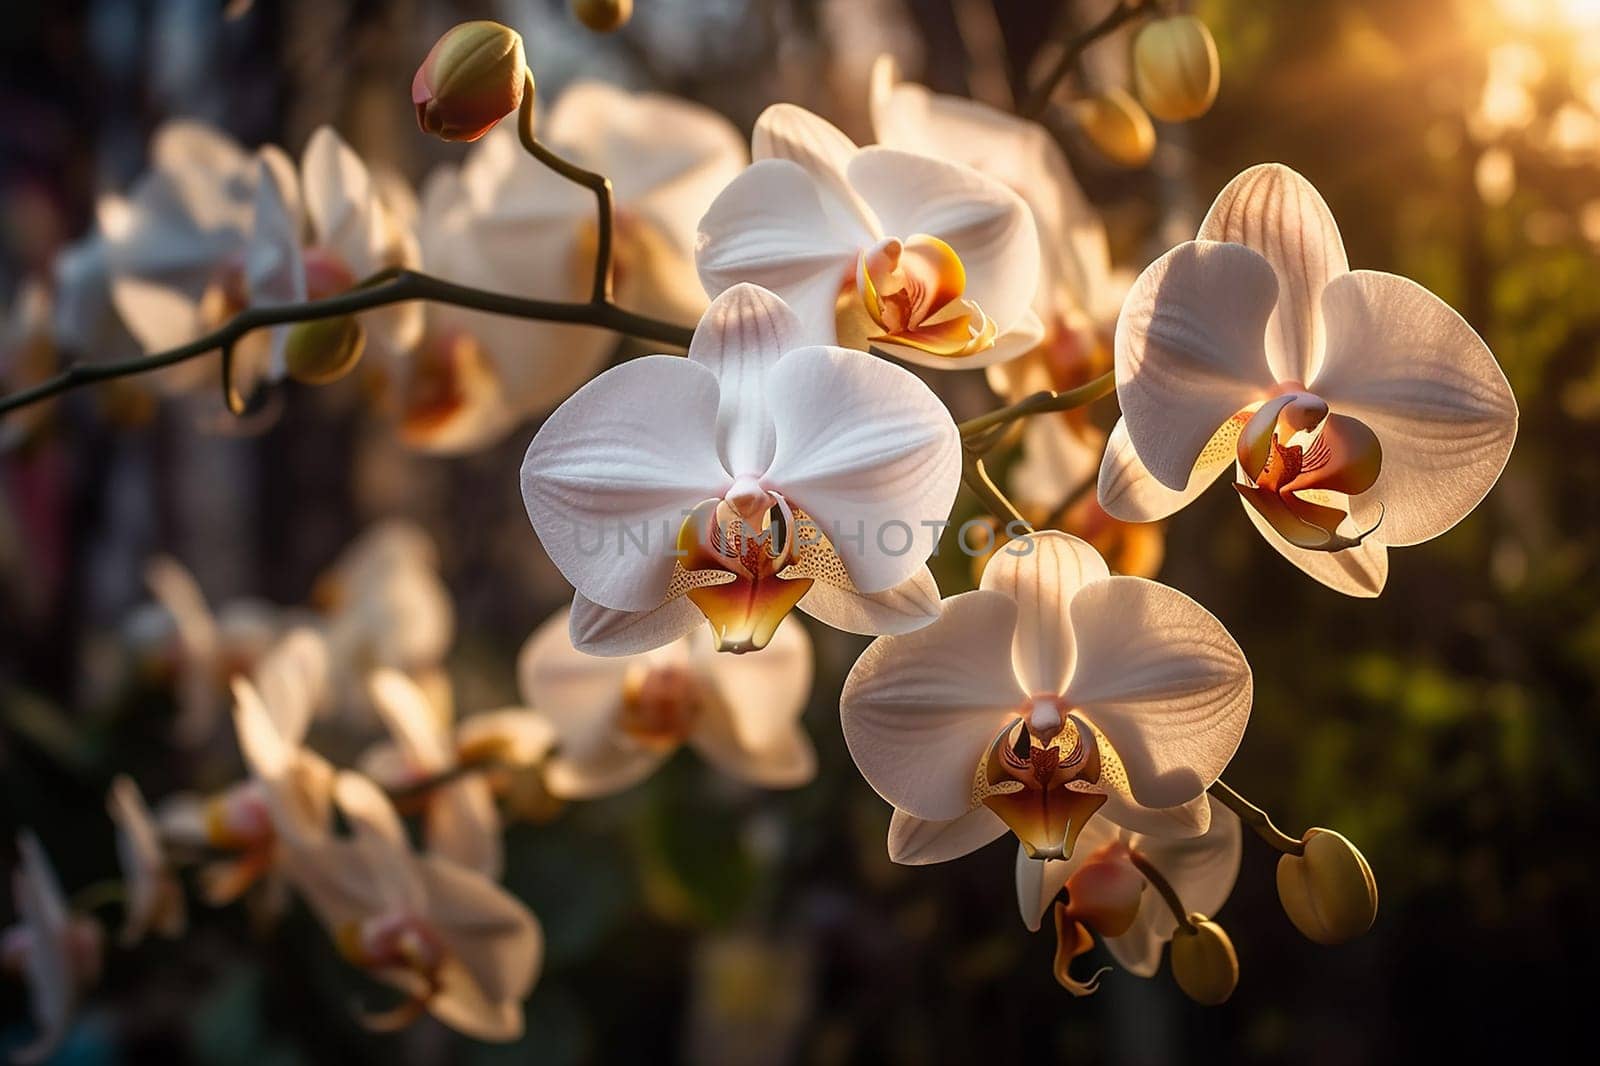 White orchids with a sunset backlight in a garden. by Hype2art